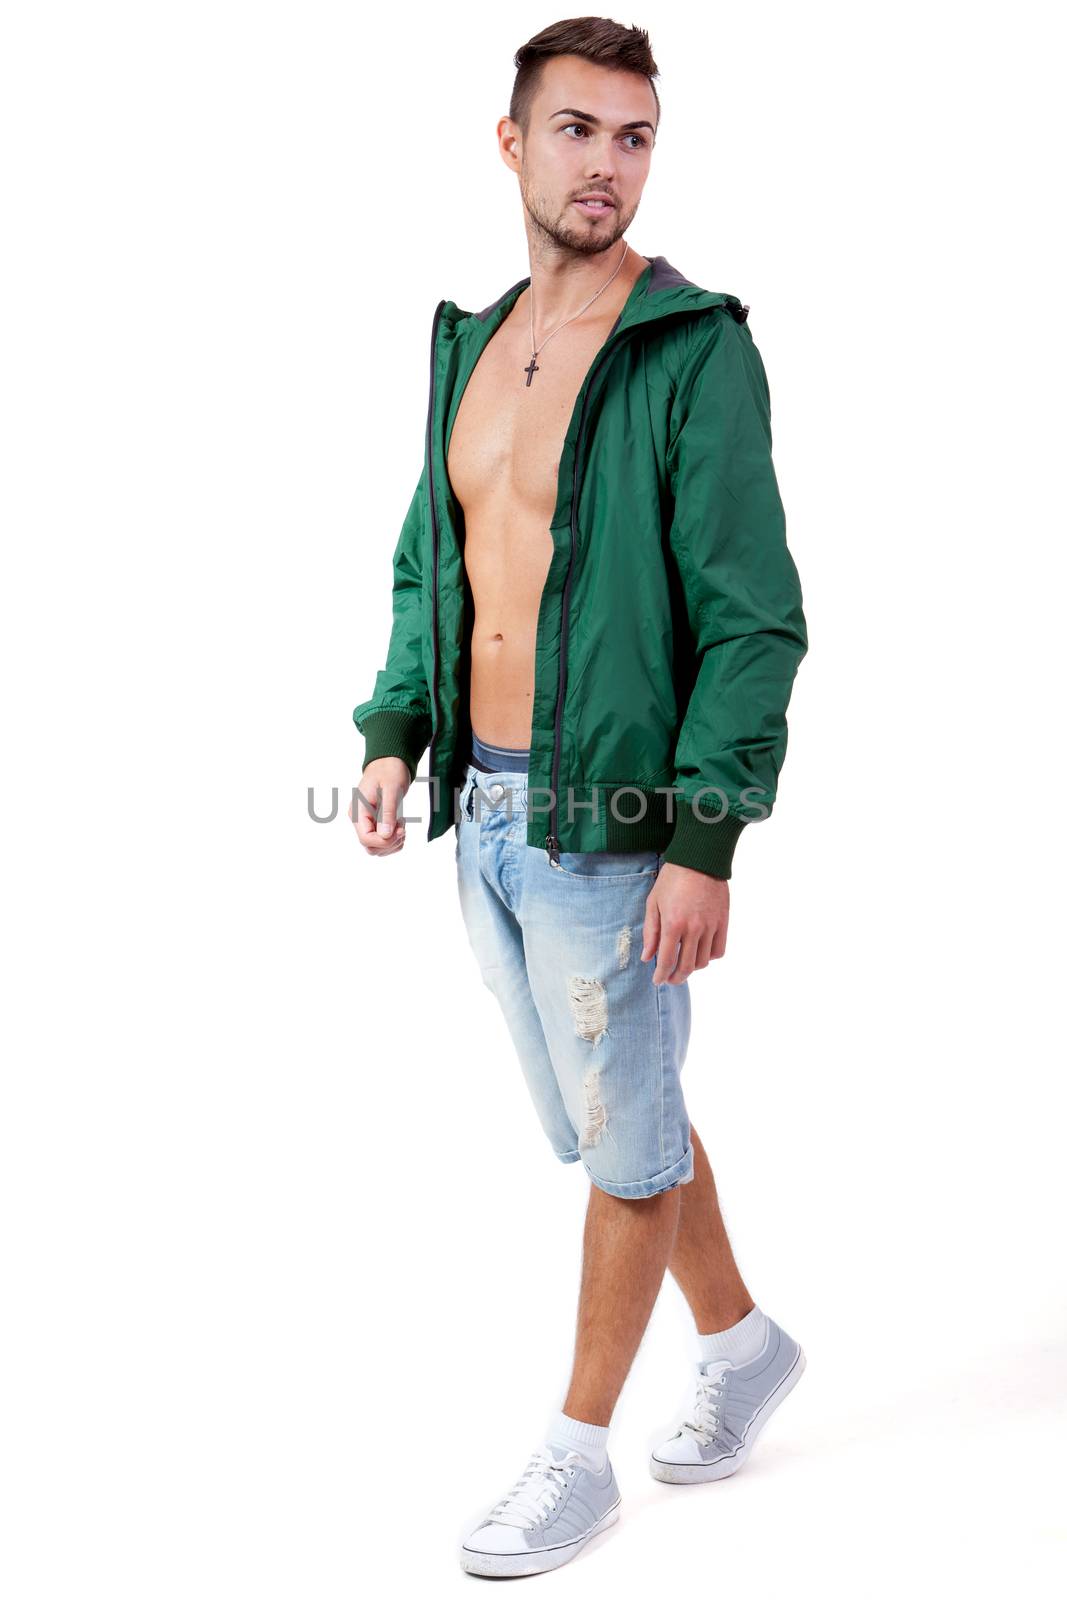 young adult man with green jacket portrait isolated on white